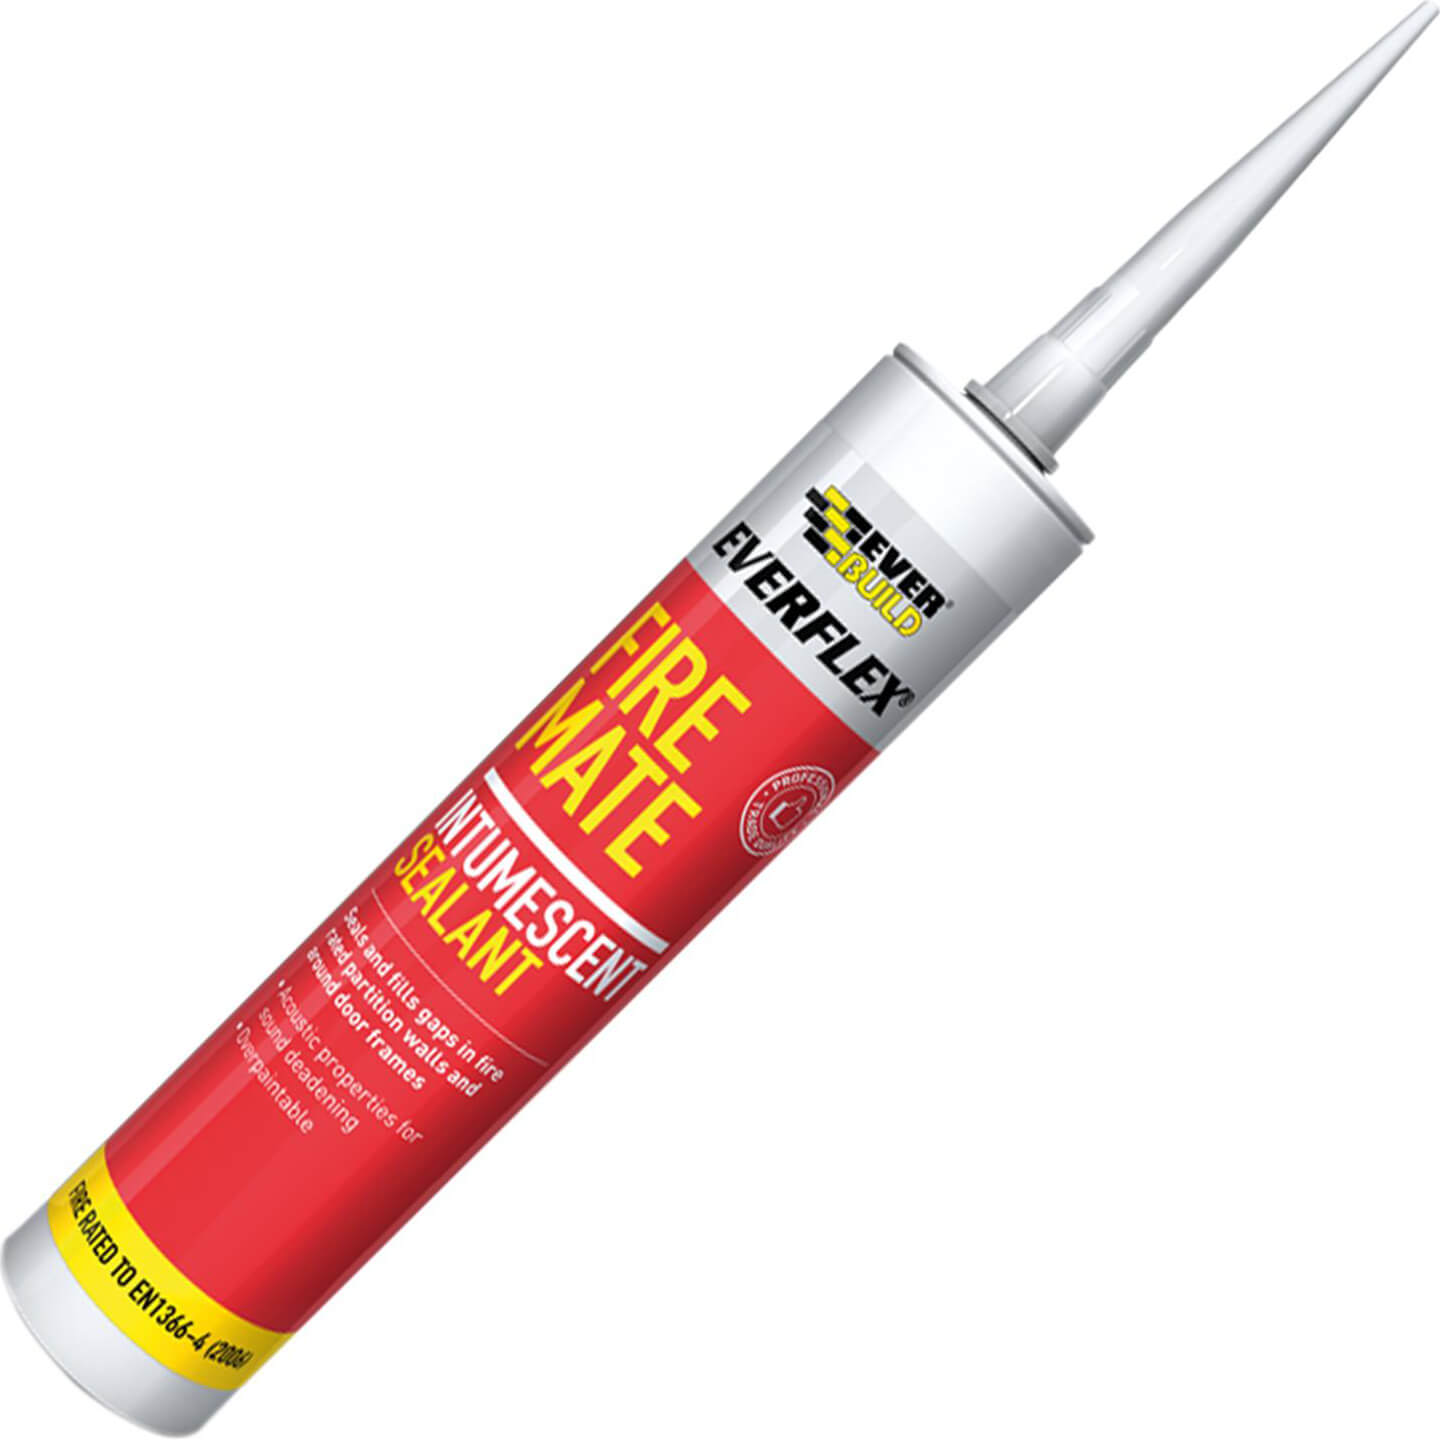 Image of Everbuild Fire Mate Intumescent Sealant White